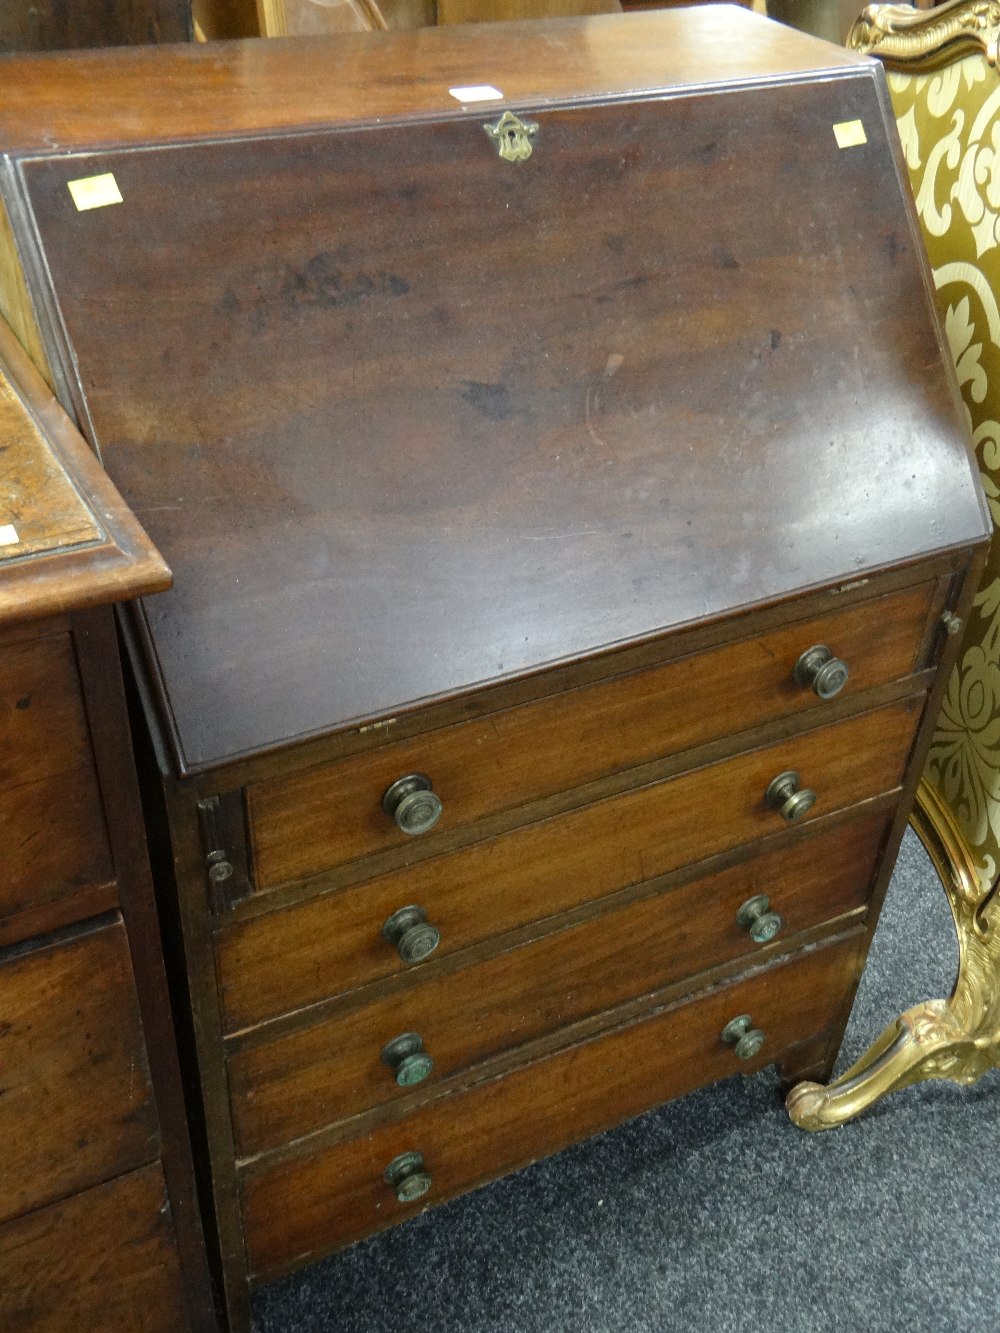 A small antique mahogany bureau composed of four graduated drawers, the sloped front revealing